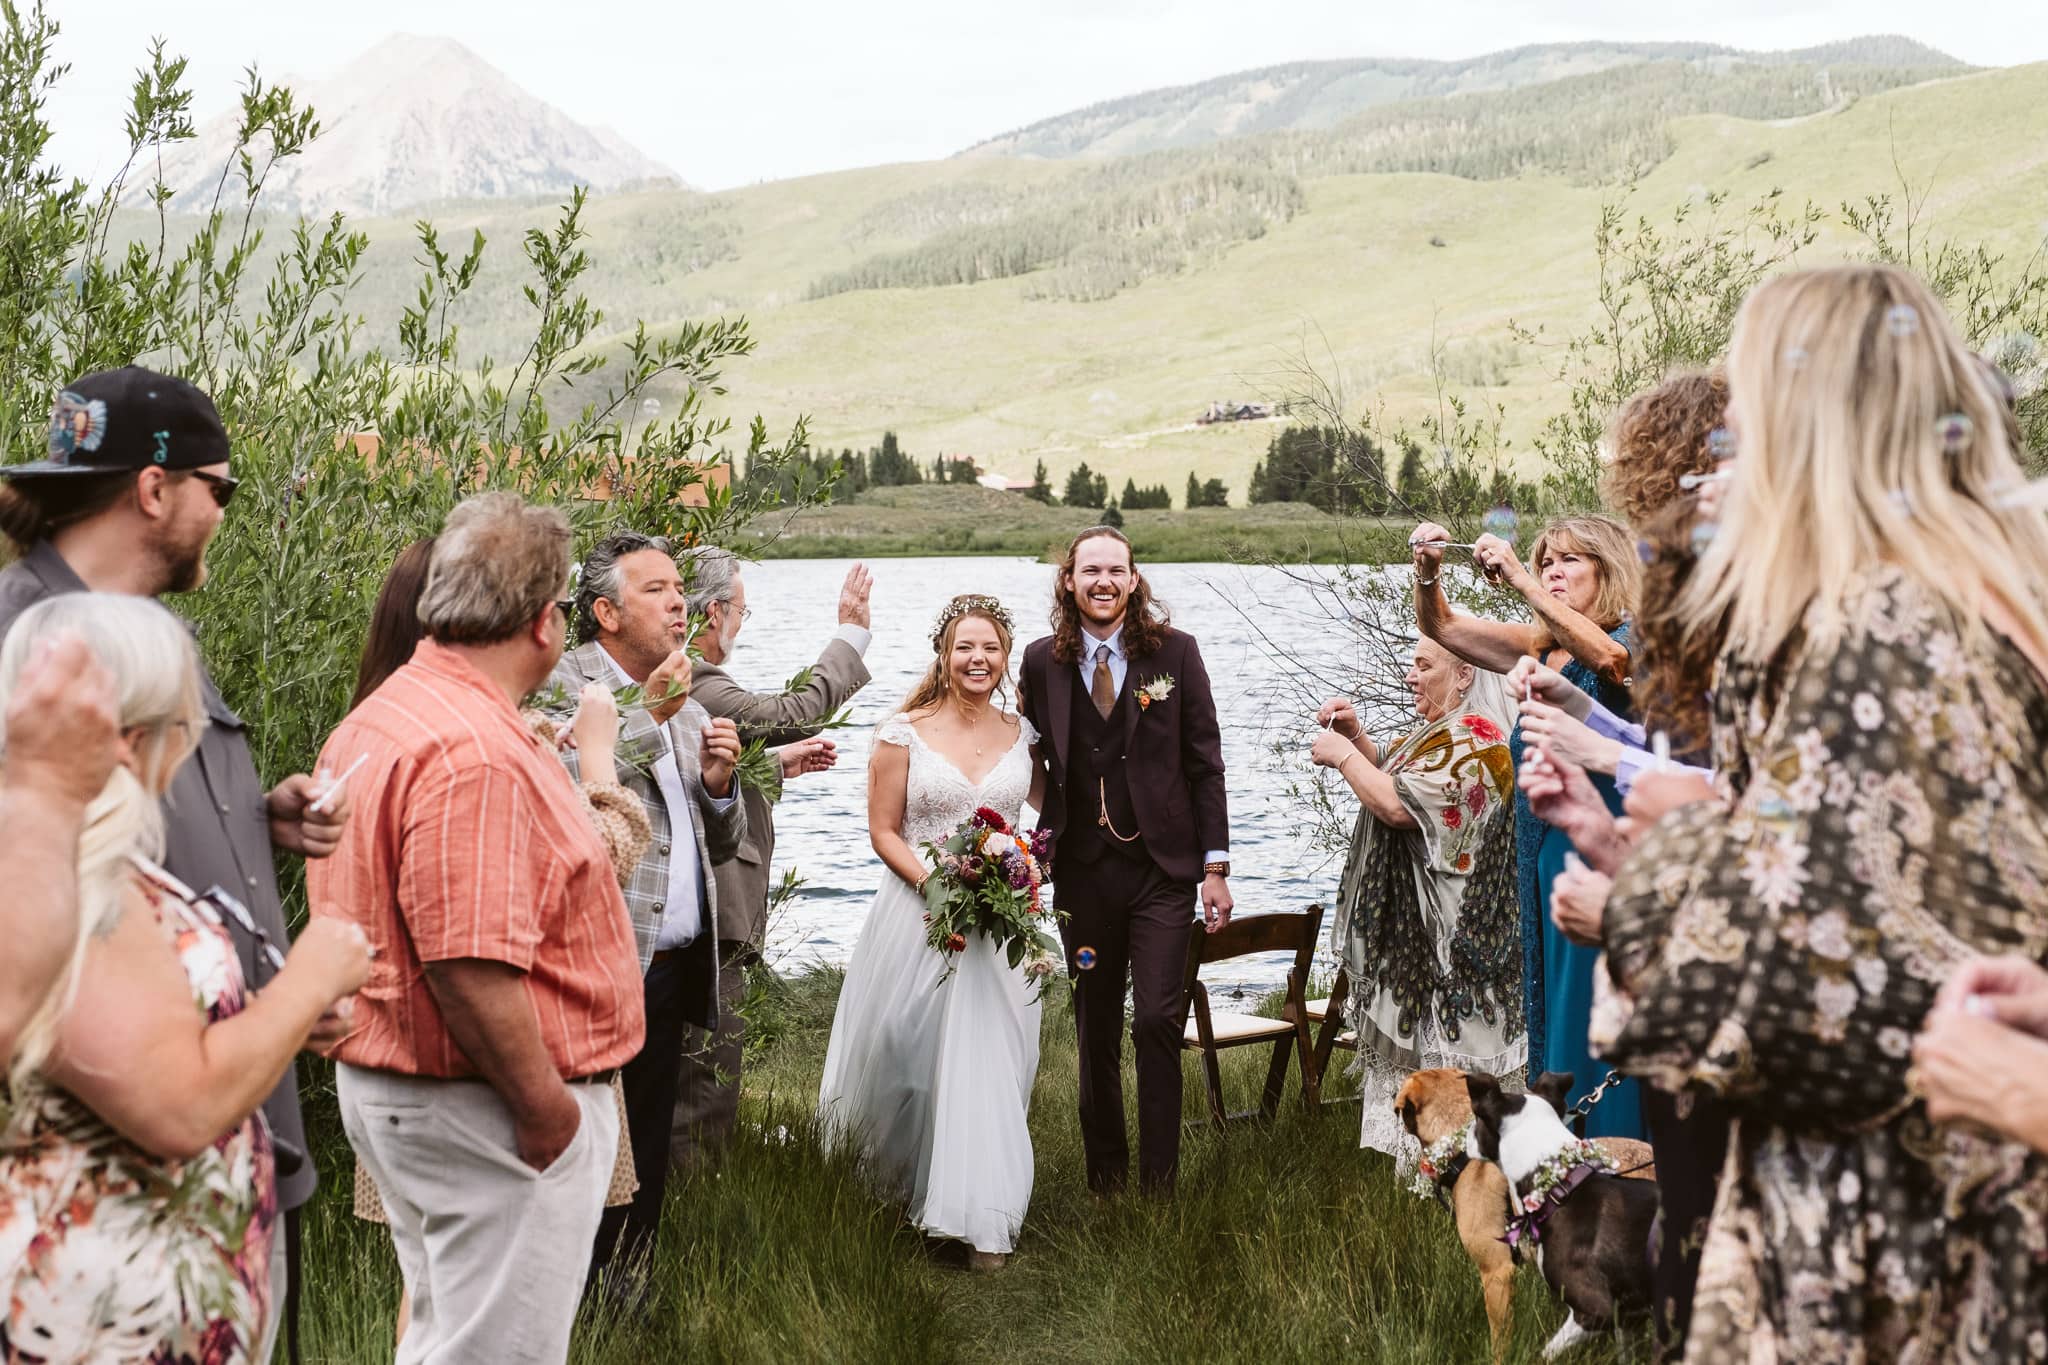 Peanut Lake wedding in Crested Butte